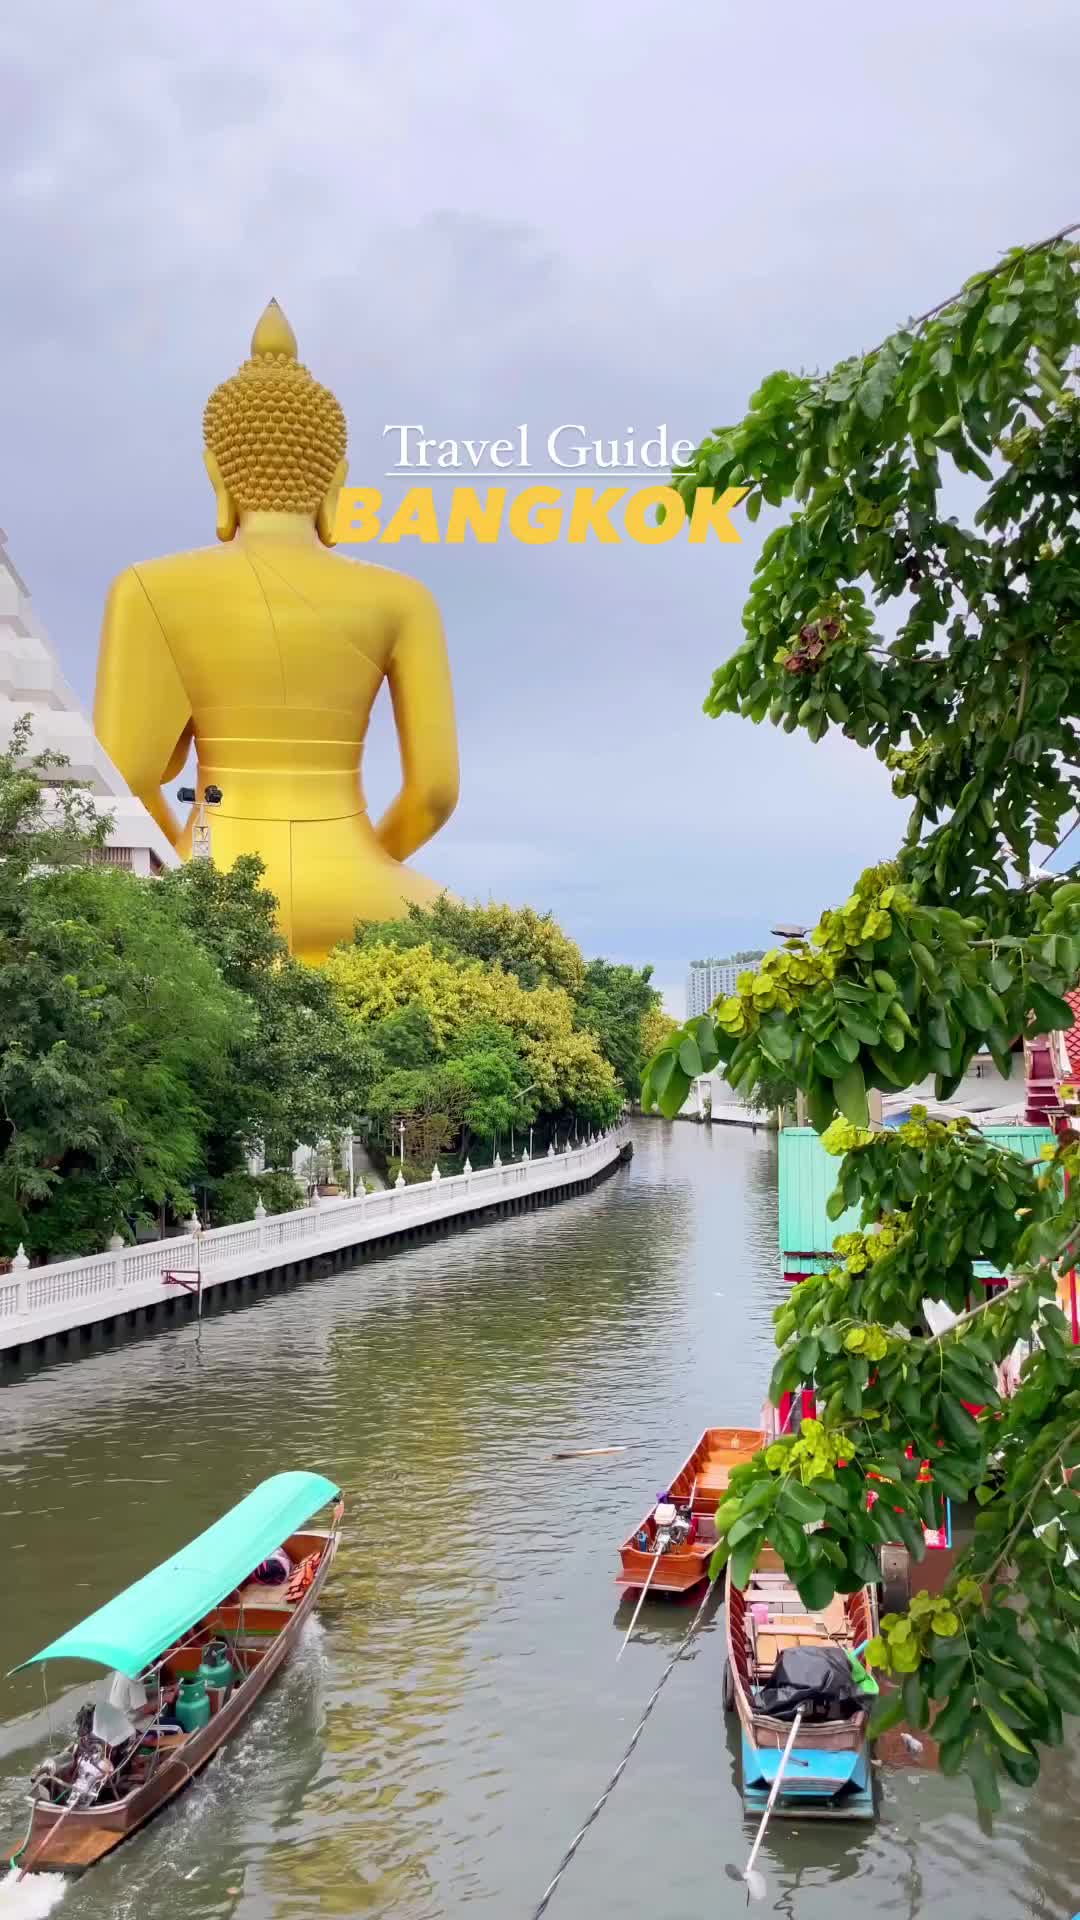 Top Places to Visit in Bangkok, Thailand